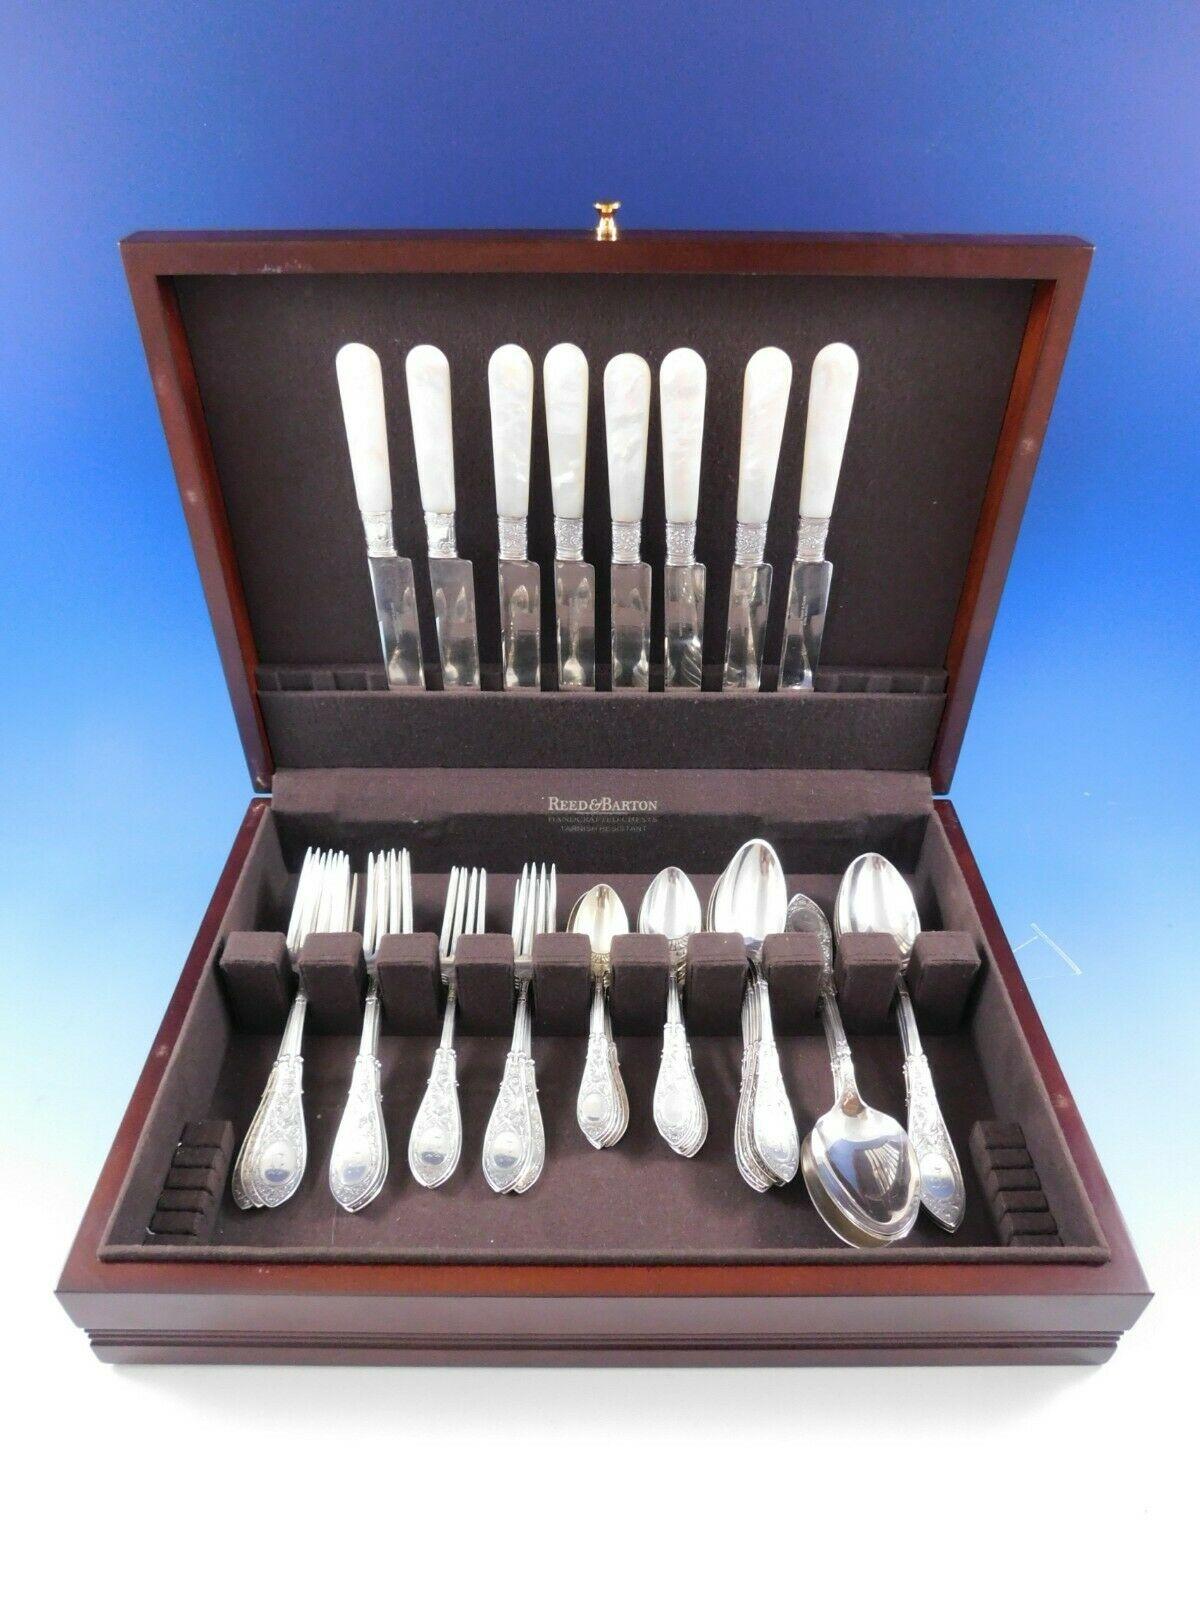 Arabesque by Whiting sterling silver flatware set - 56 pieces. This pattern was patented in the year 1875 and features a figural griffin. This set, like many early sterling flatware sets, includes Mother of Pearl Handle dinner knives . 

This set